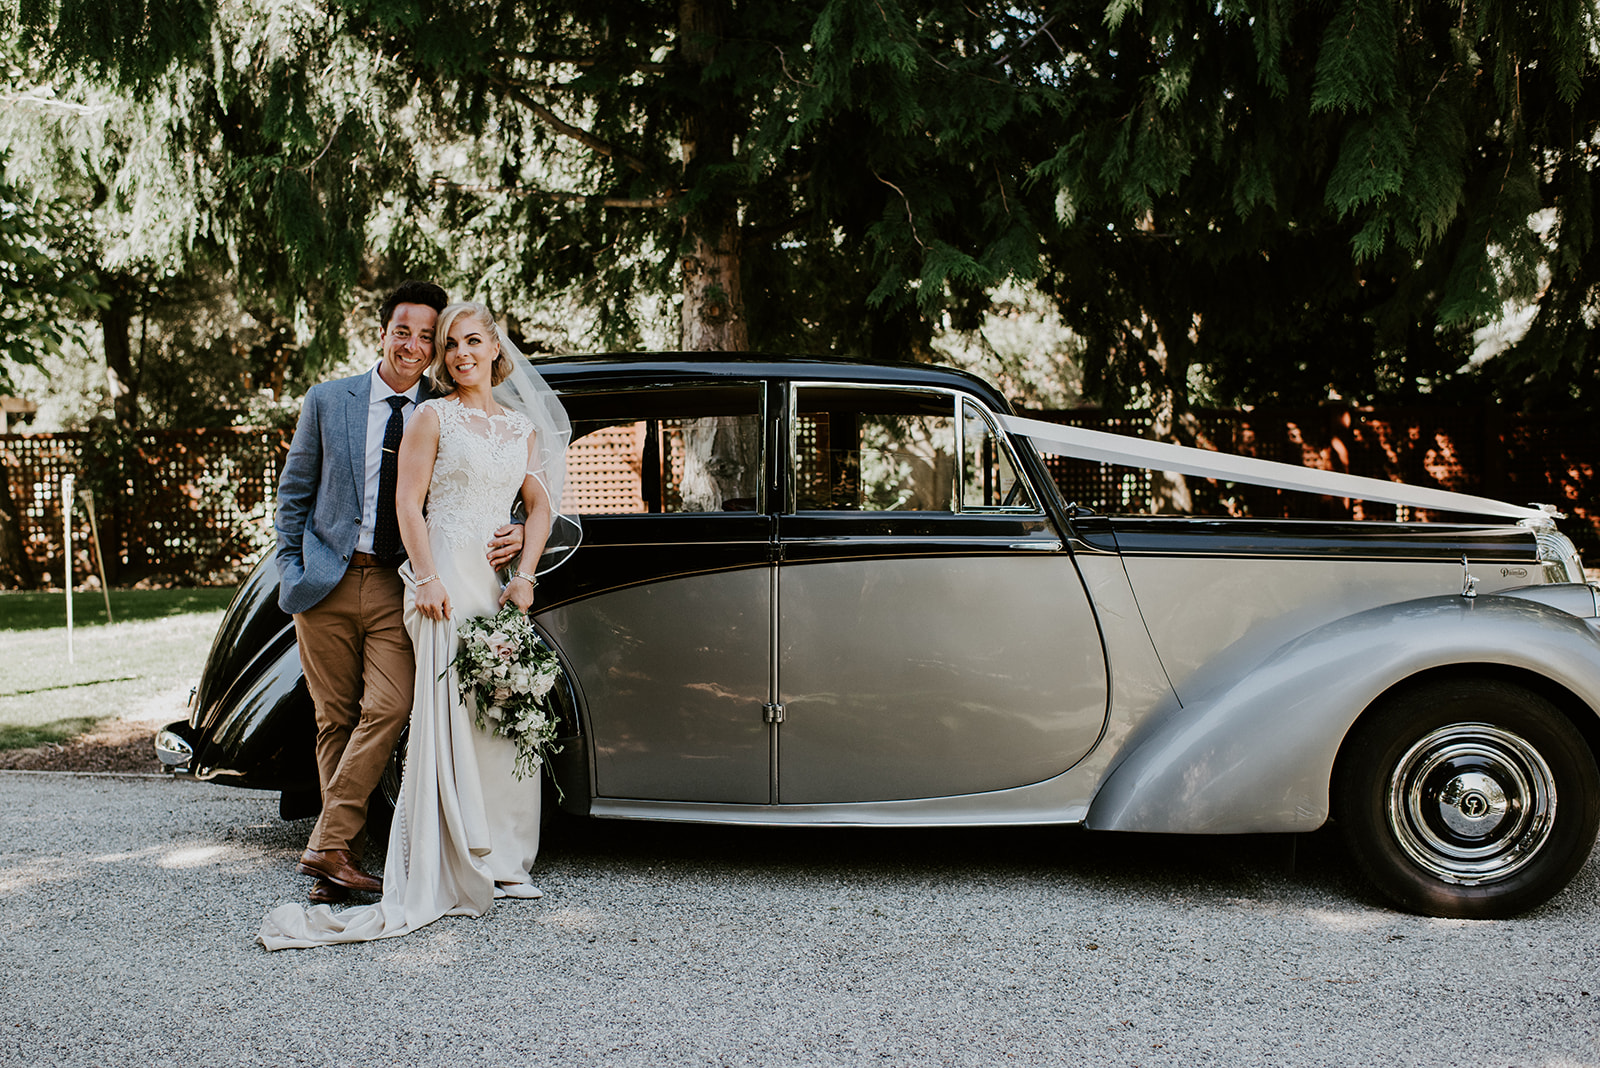 Elopement Packages Queenstown- Classic car hire for your wedding day, couple standing in front of their wedding car